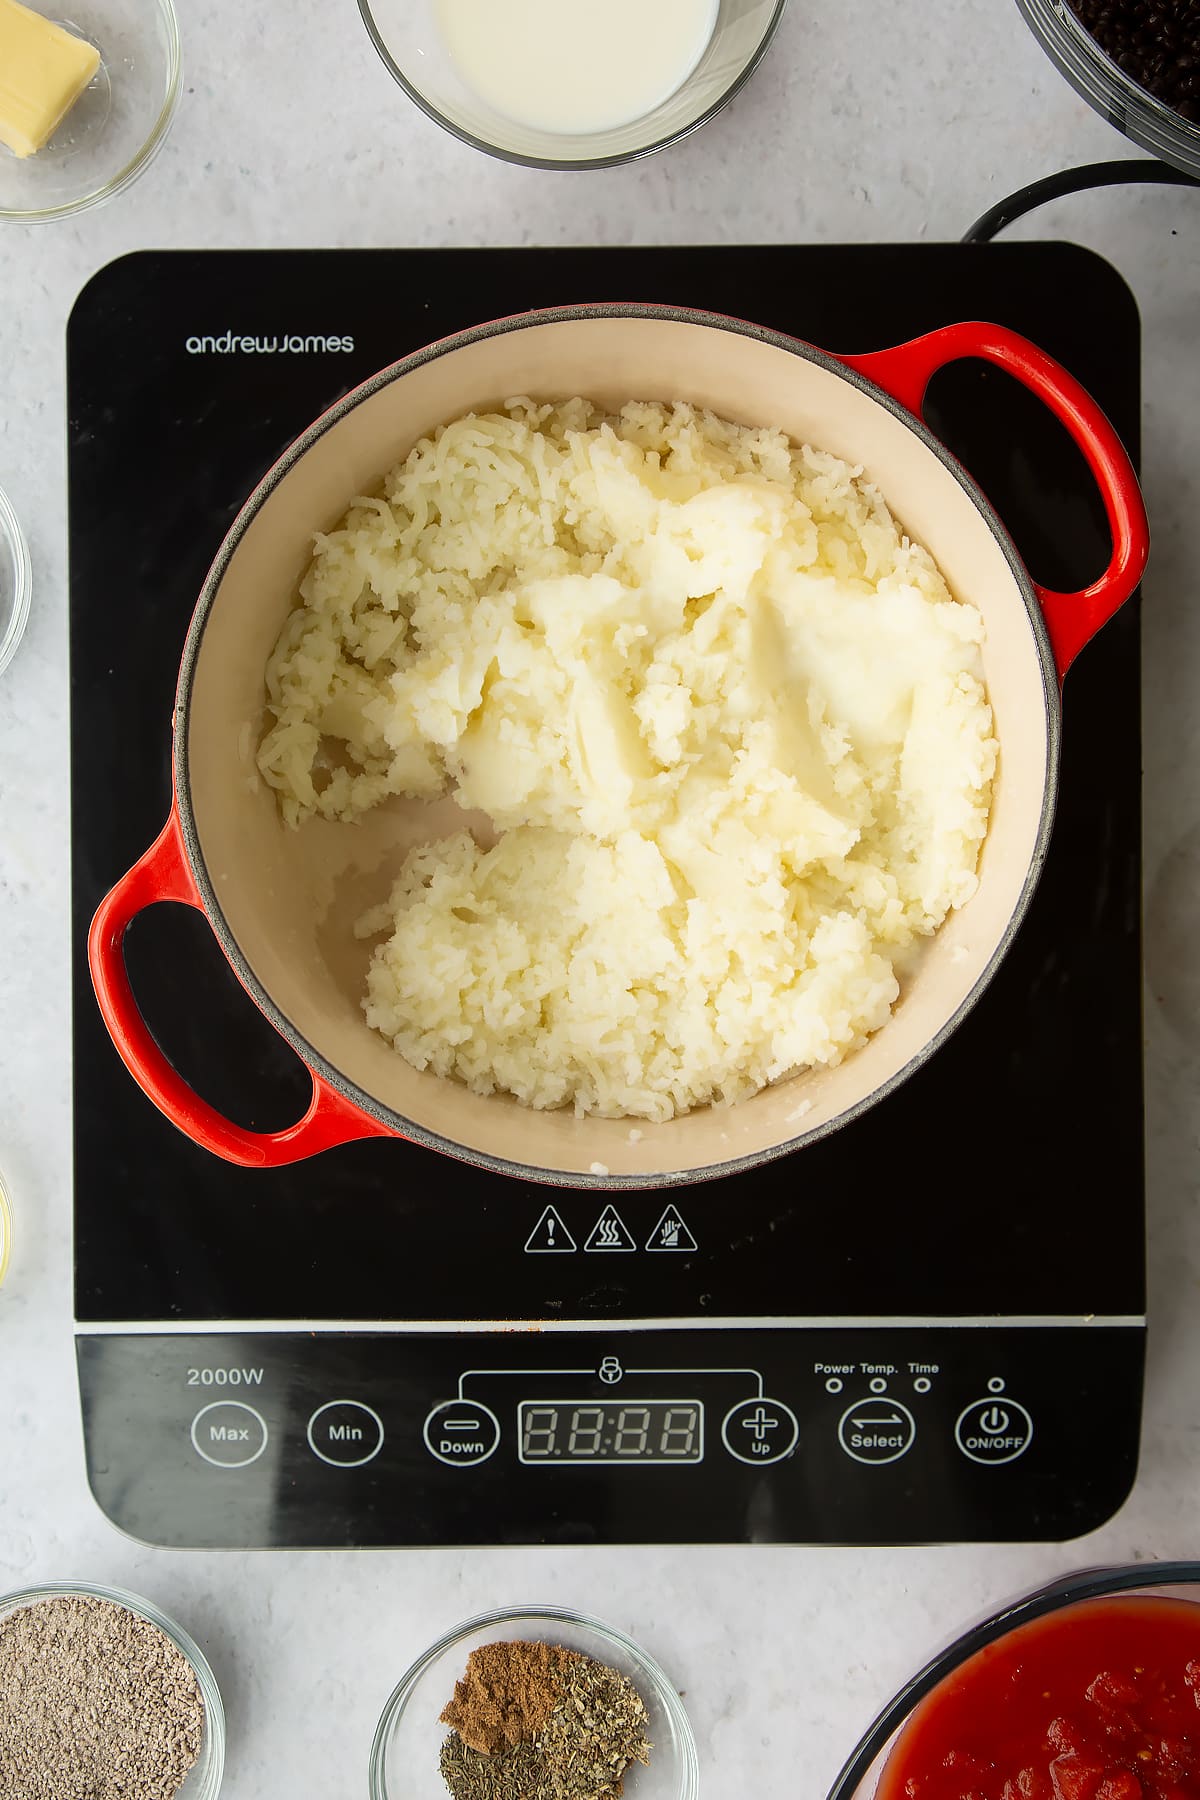 a large pan on an induction hob filled with mashed potato.